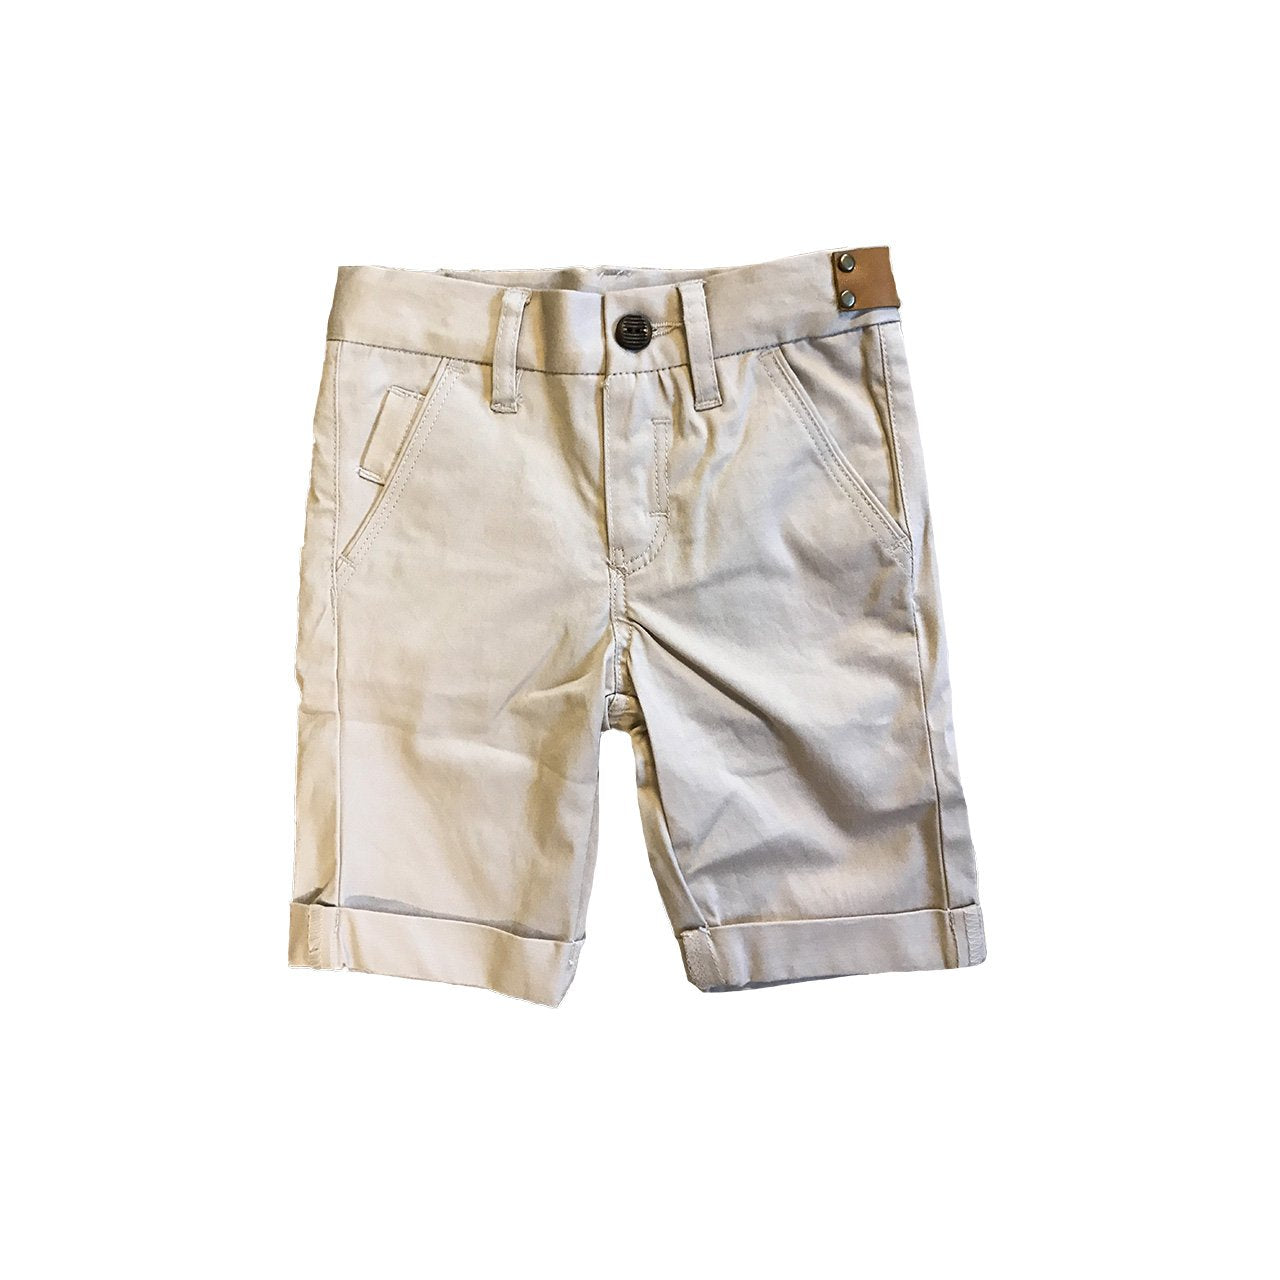 Ollie Shorts - Starkers